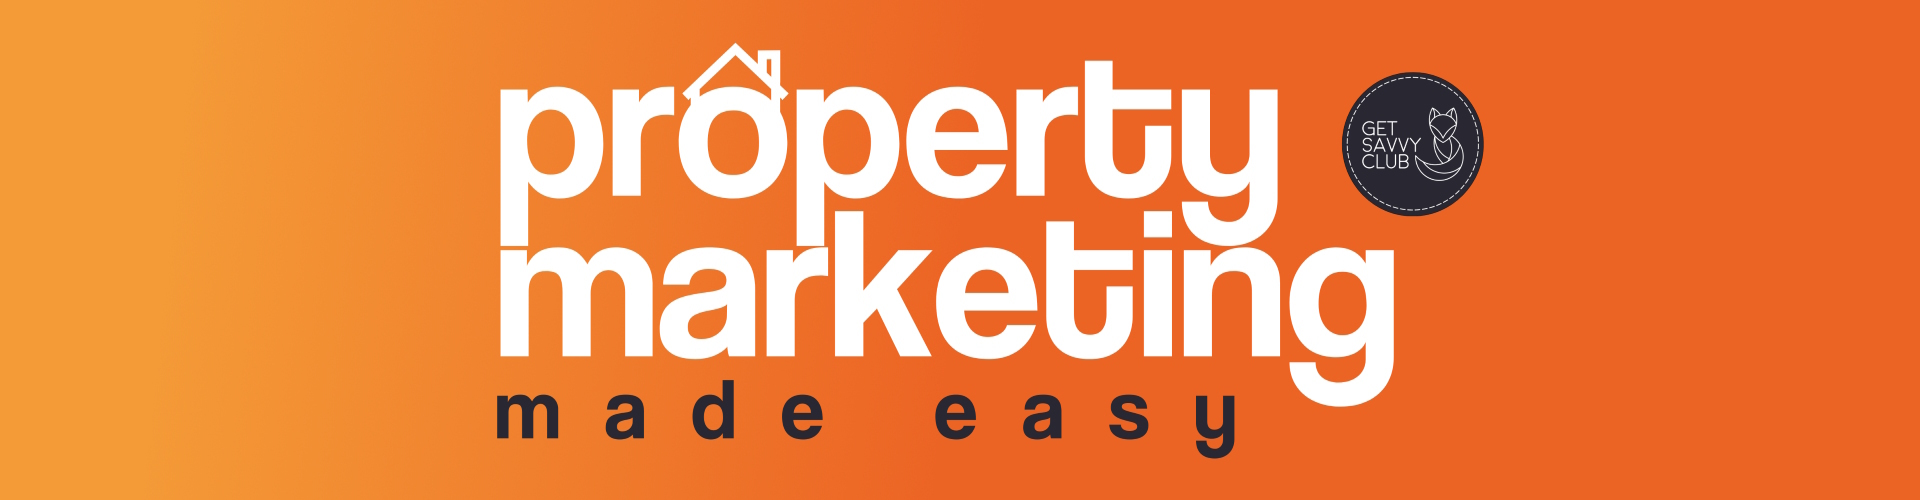 Property Marketing Made Easy from Get Savvy Club